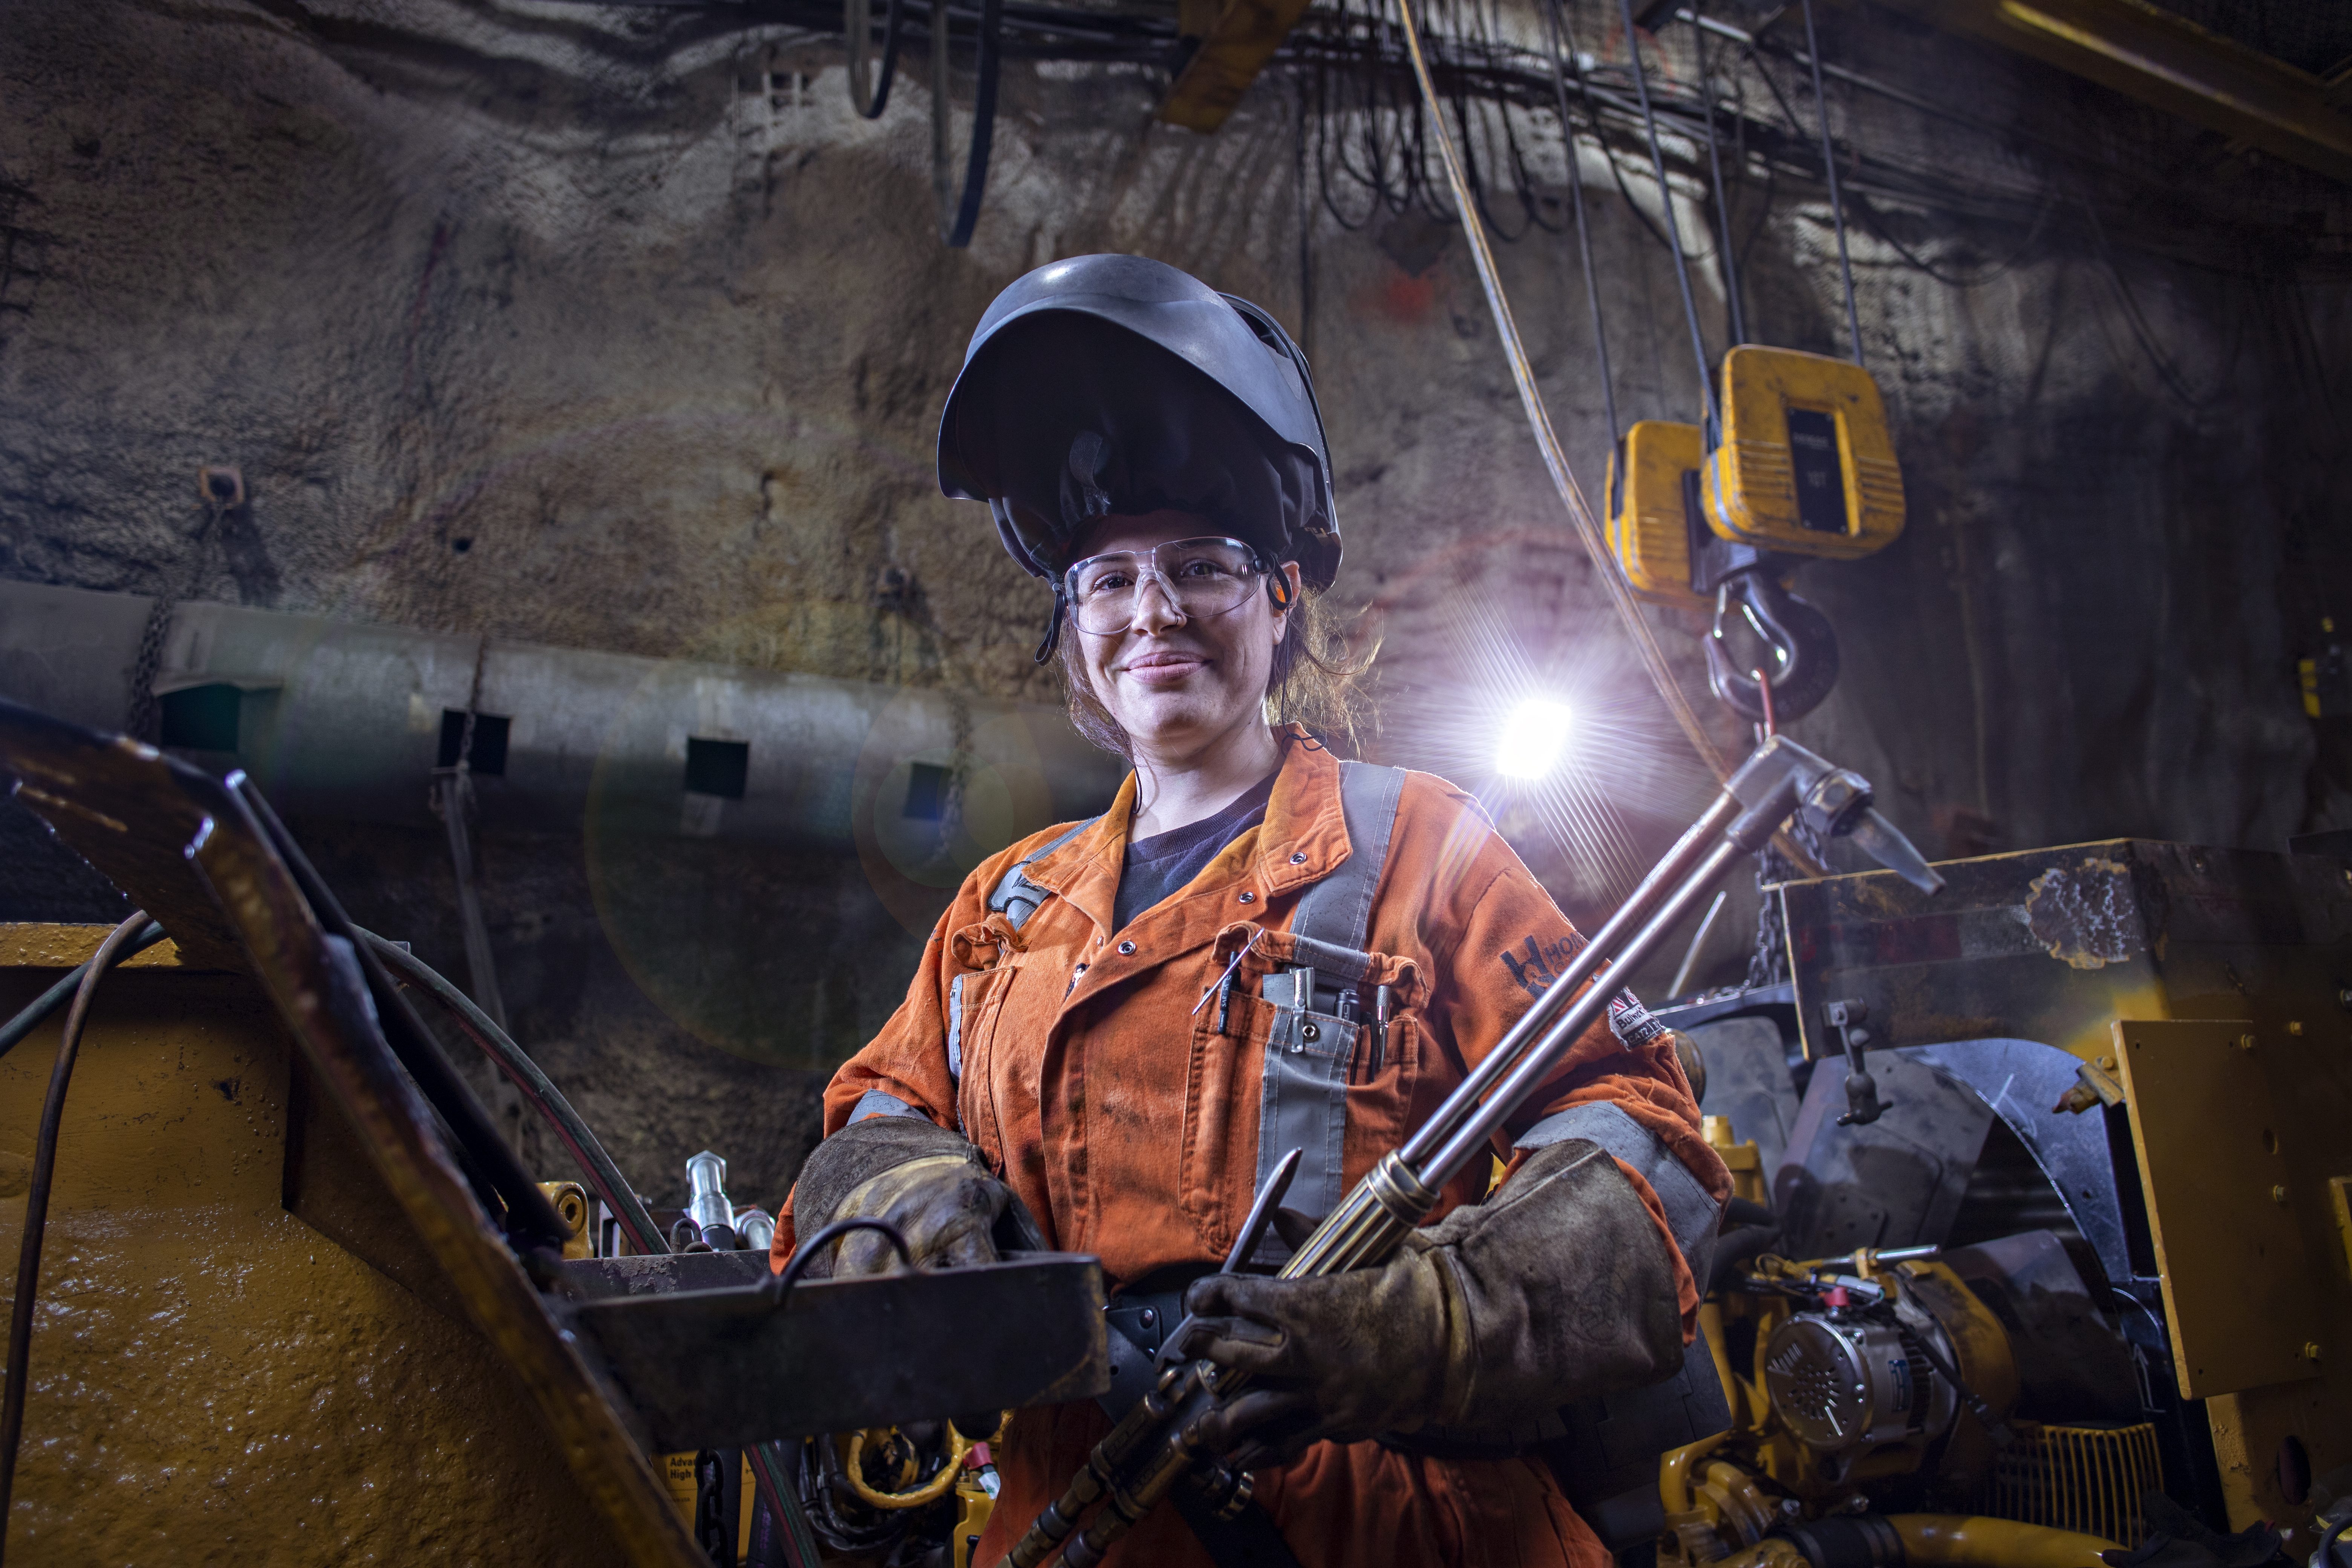 Vale employee with a piece of iron equipment in her hands. She is in an underground space, wearing protective equipment and smiling for the photo.